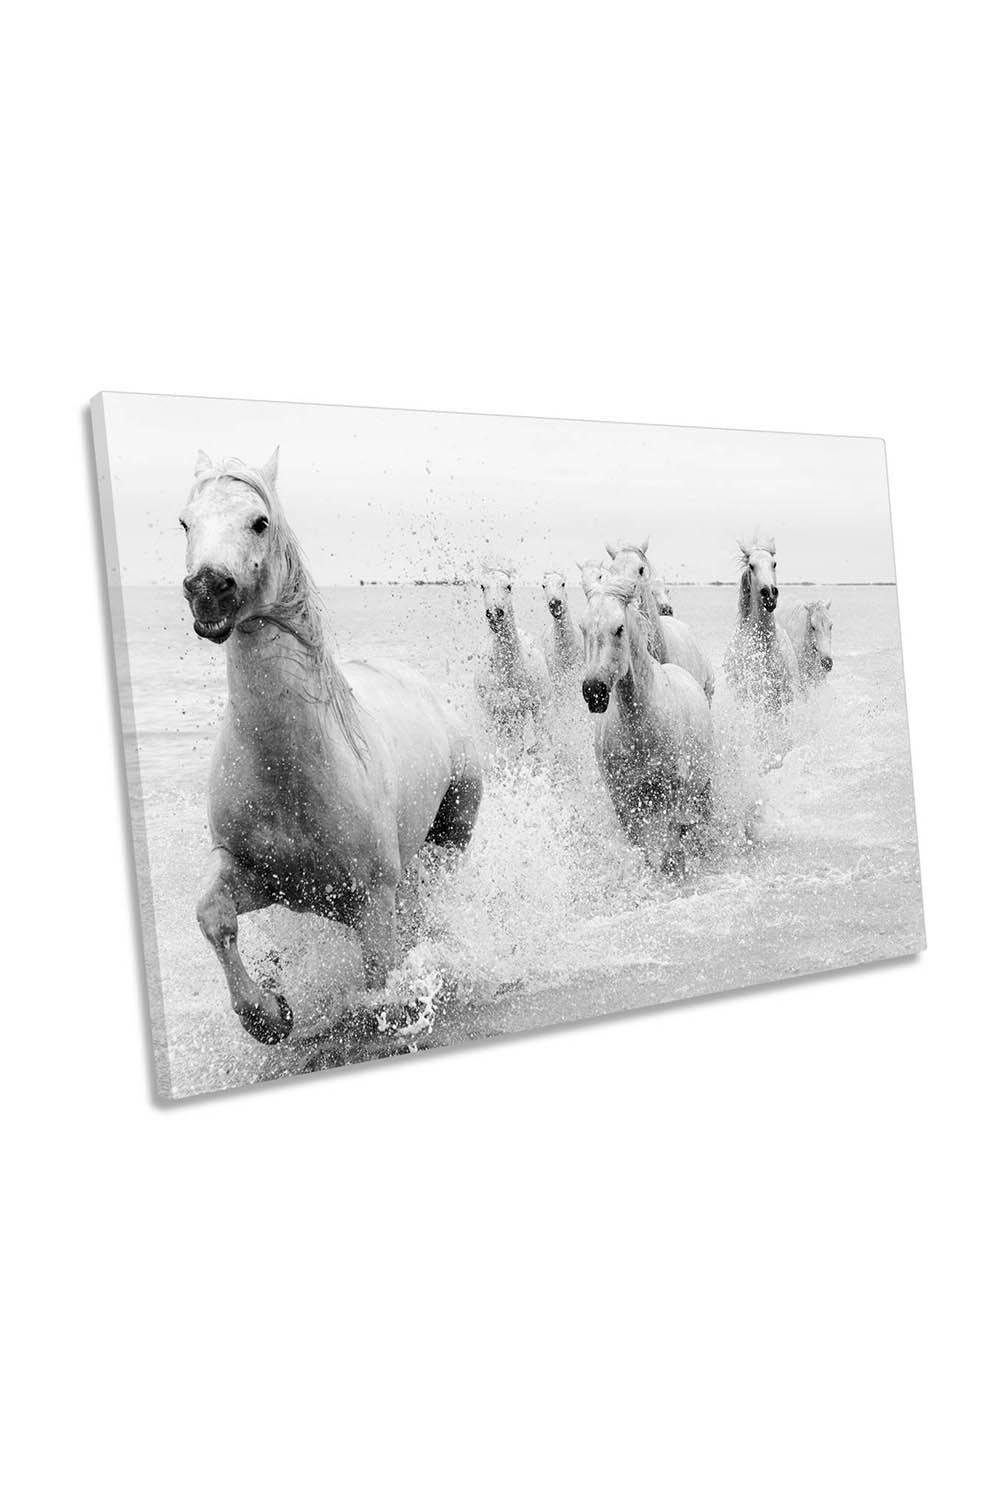 We Are Coming White Horses Beach Canvas Wall Art Picture Print